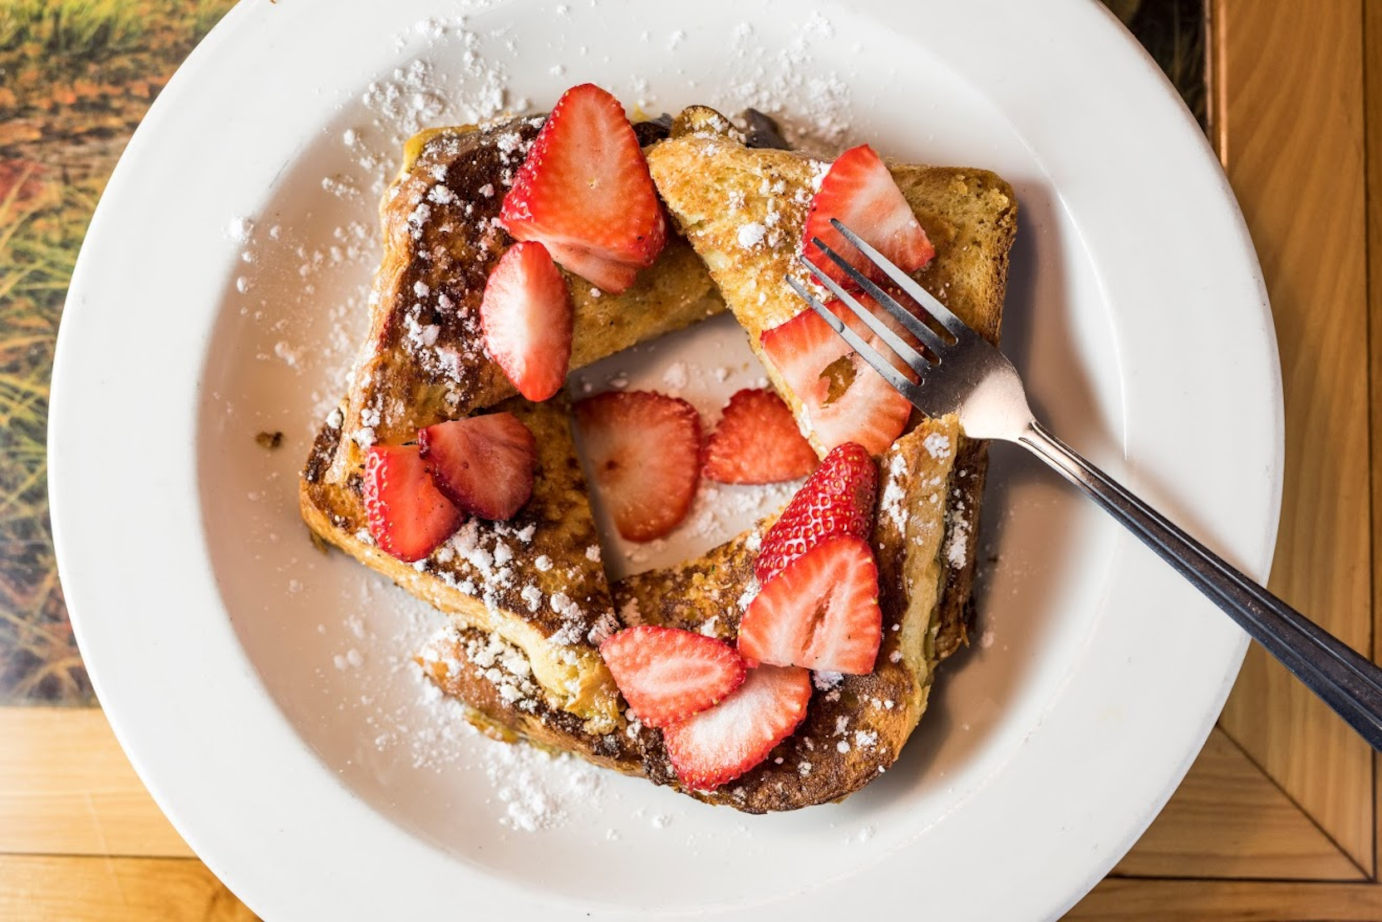 French toast with fruit on top